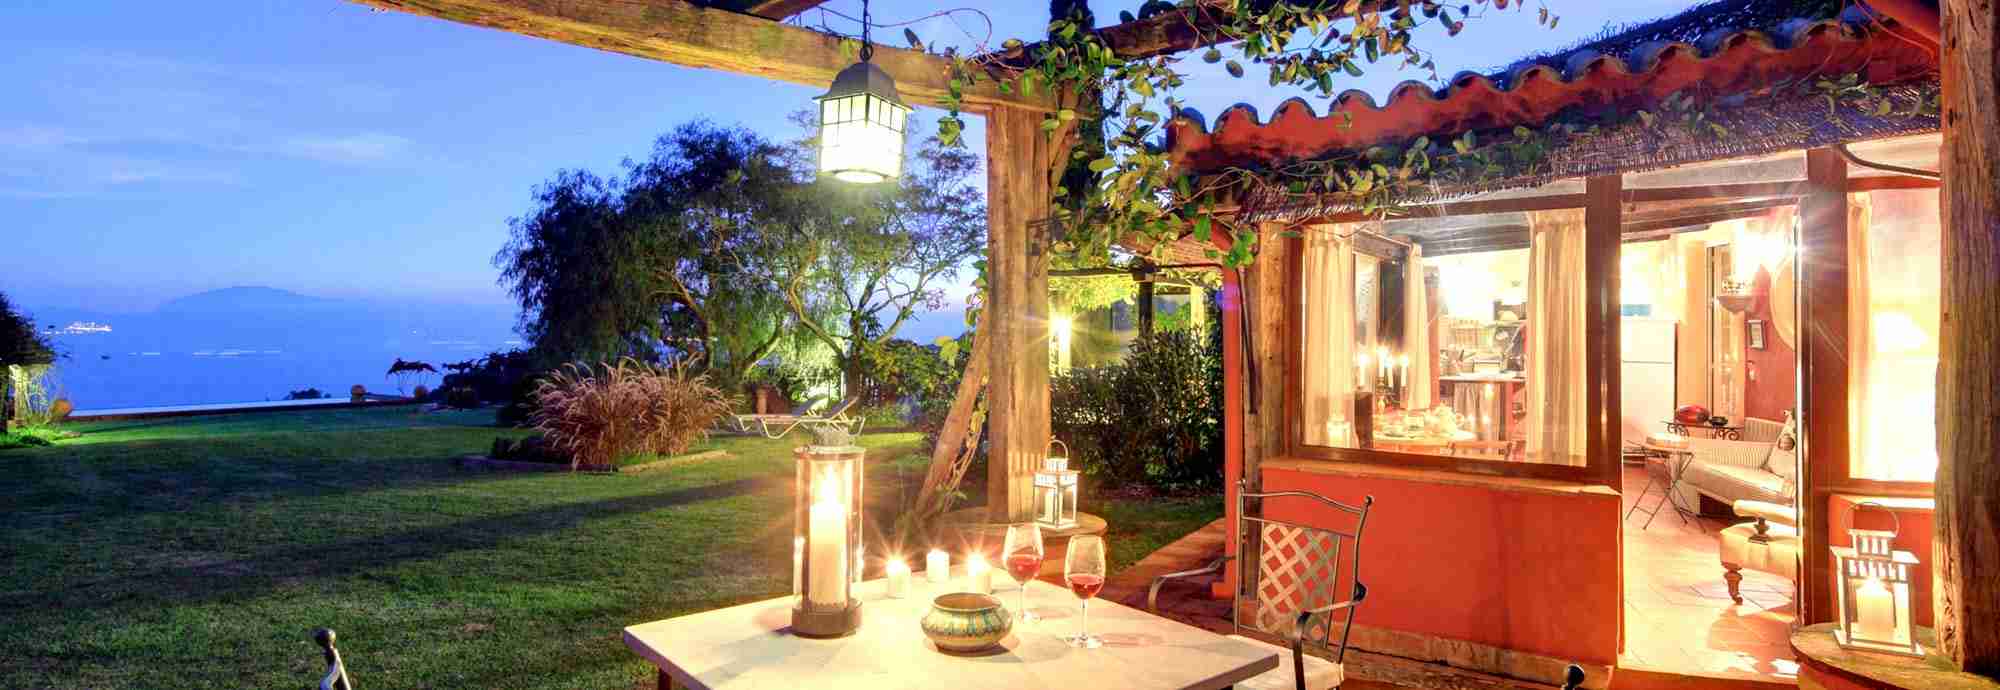 Cliff cottage with Africa view, marvellous gardens, WiFi and pool